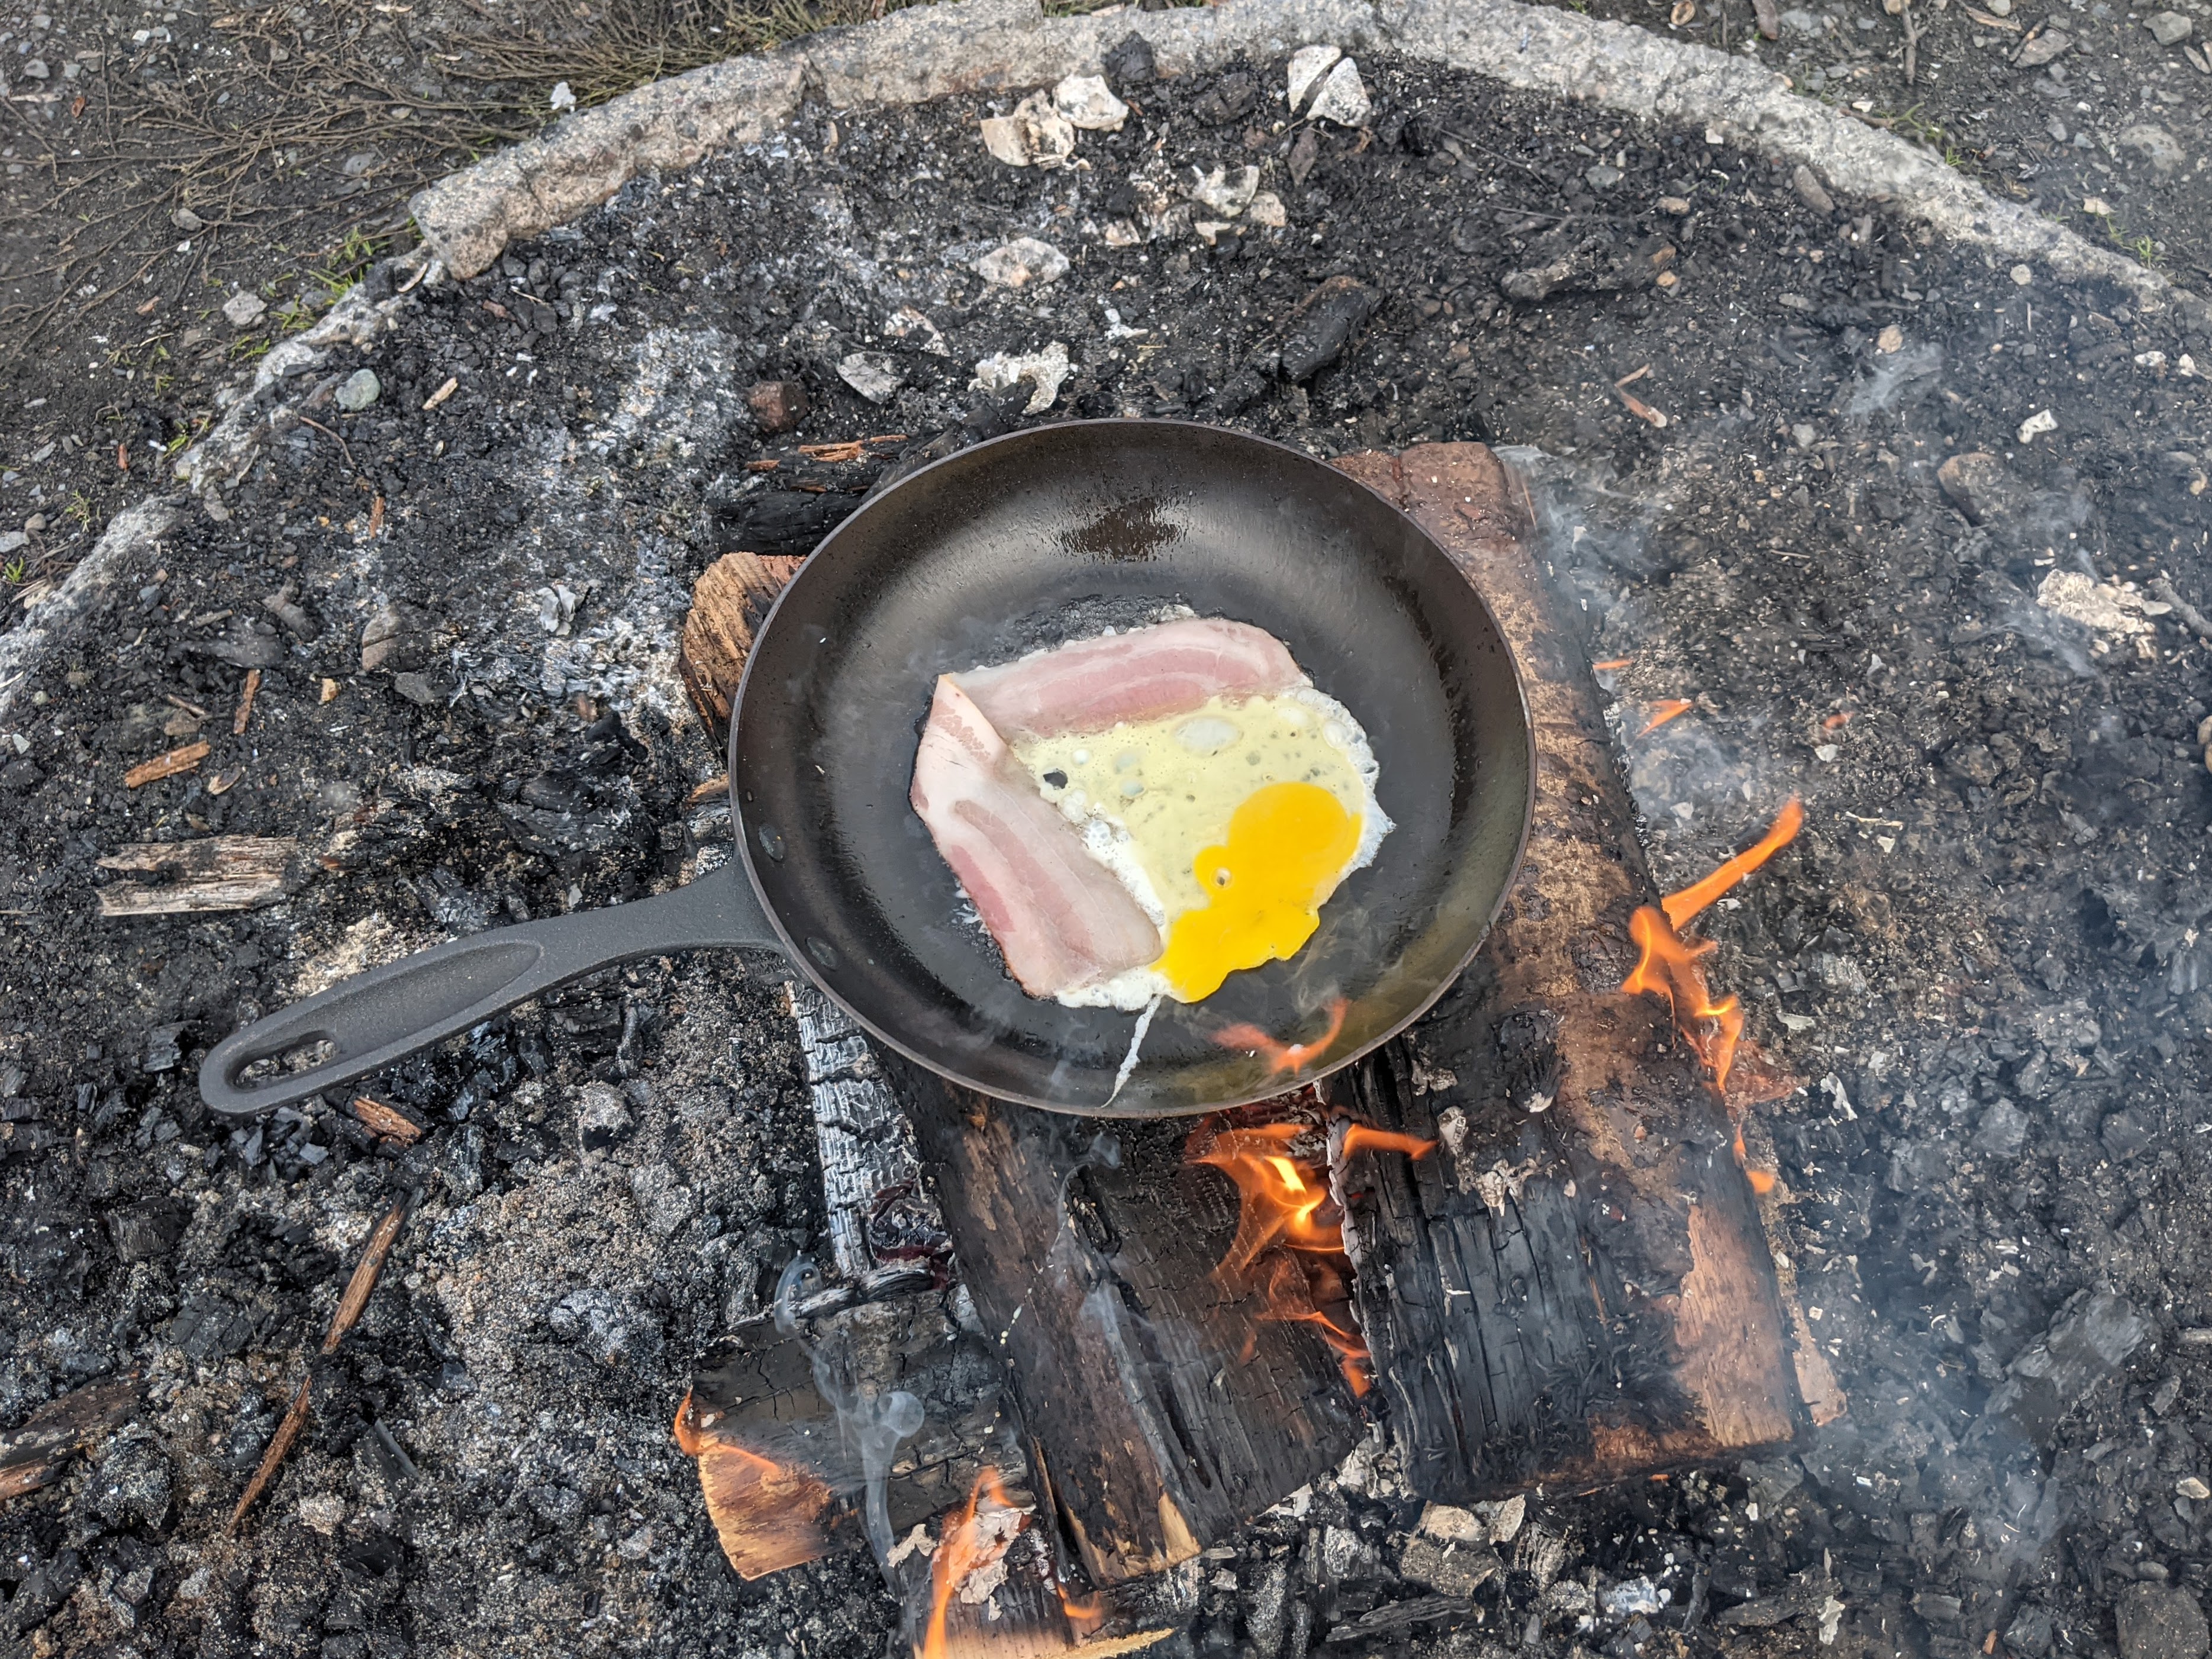 The Best Cast Iron Skillets for Camping of 2023, Tested